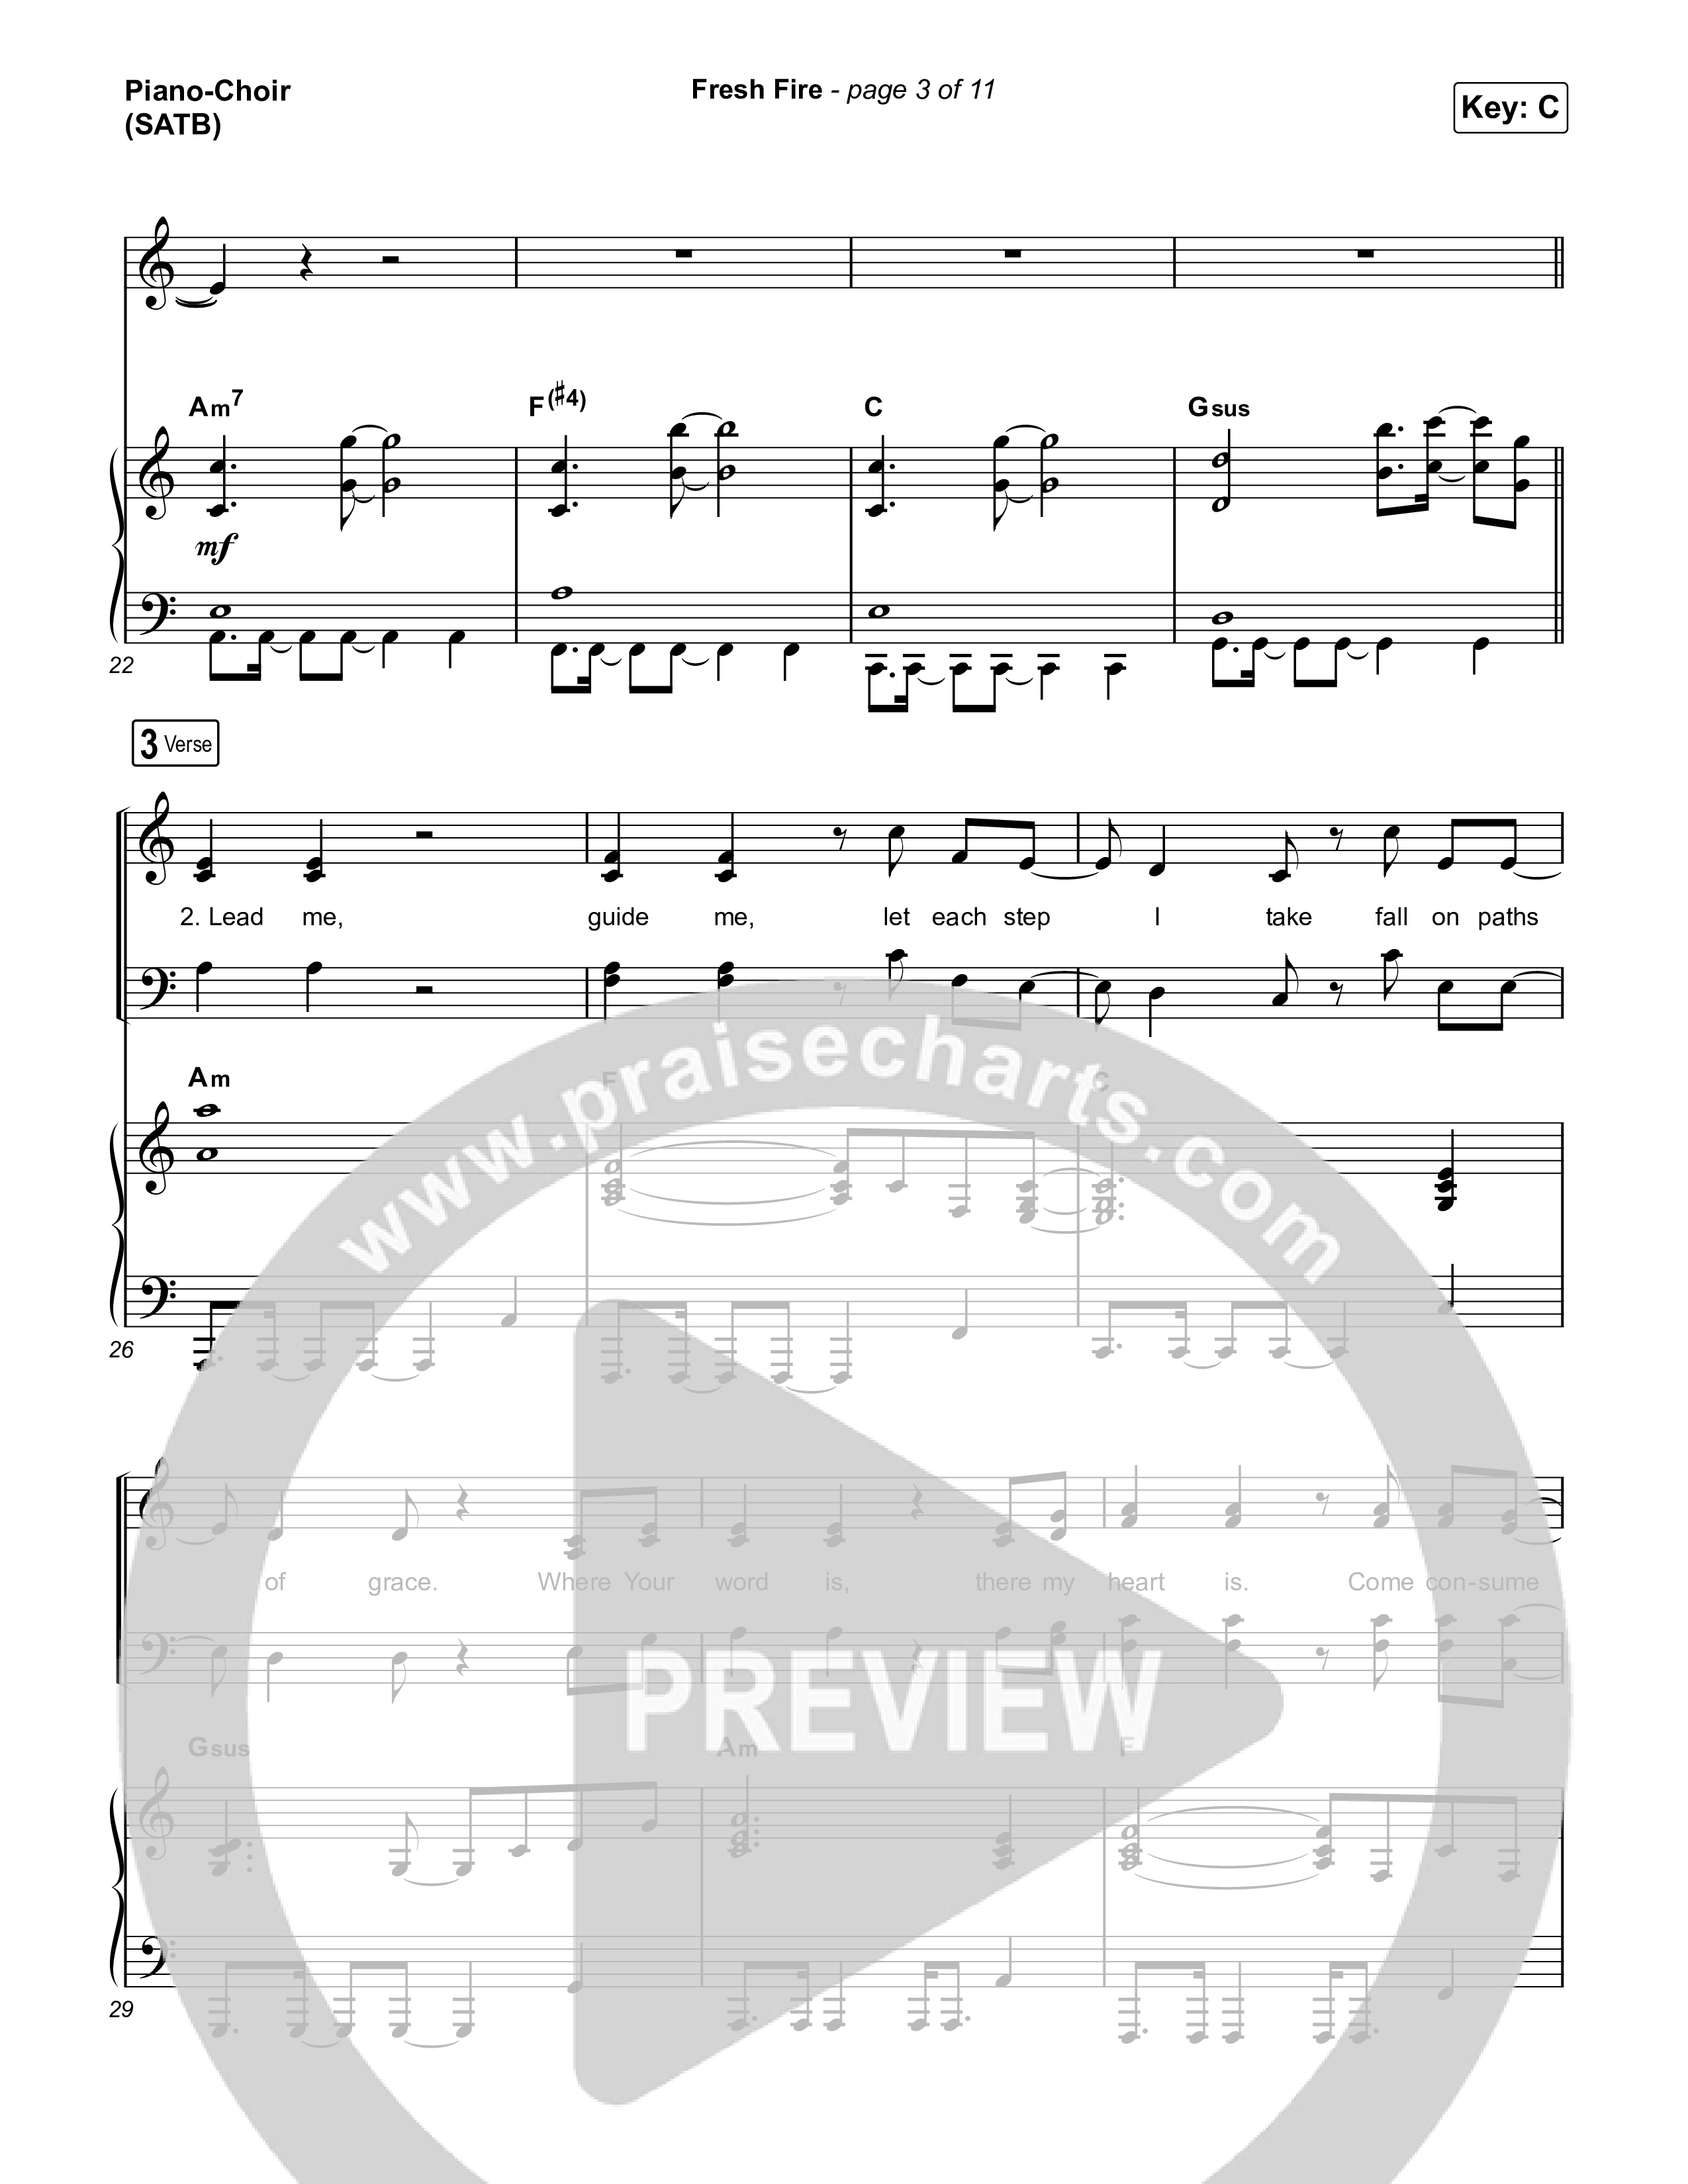 Fresh Fire (Live) Piano/Vocal (SATB) (The Belonging Co / Andrew Holt)